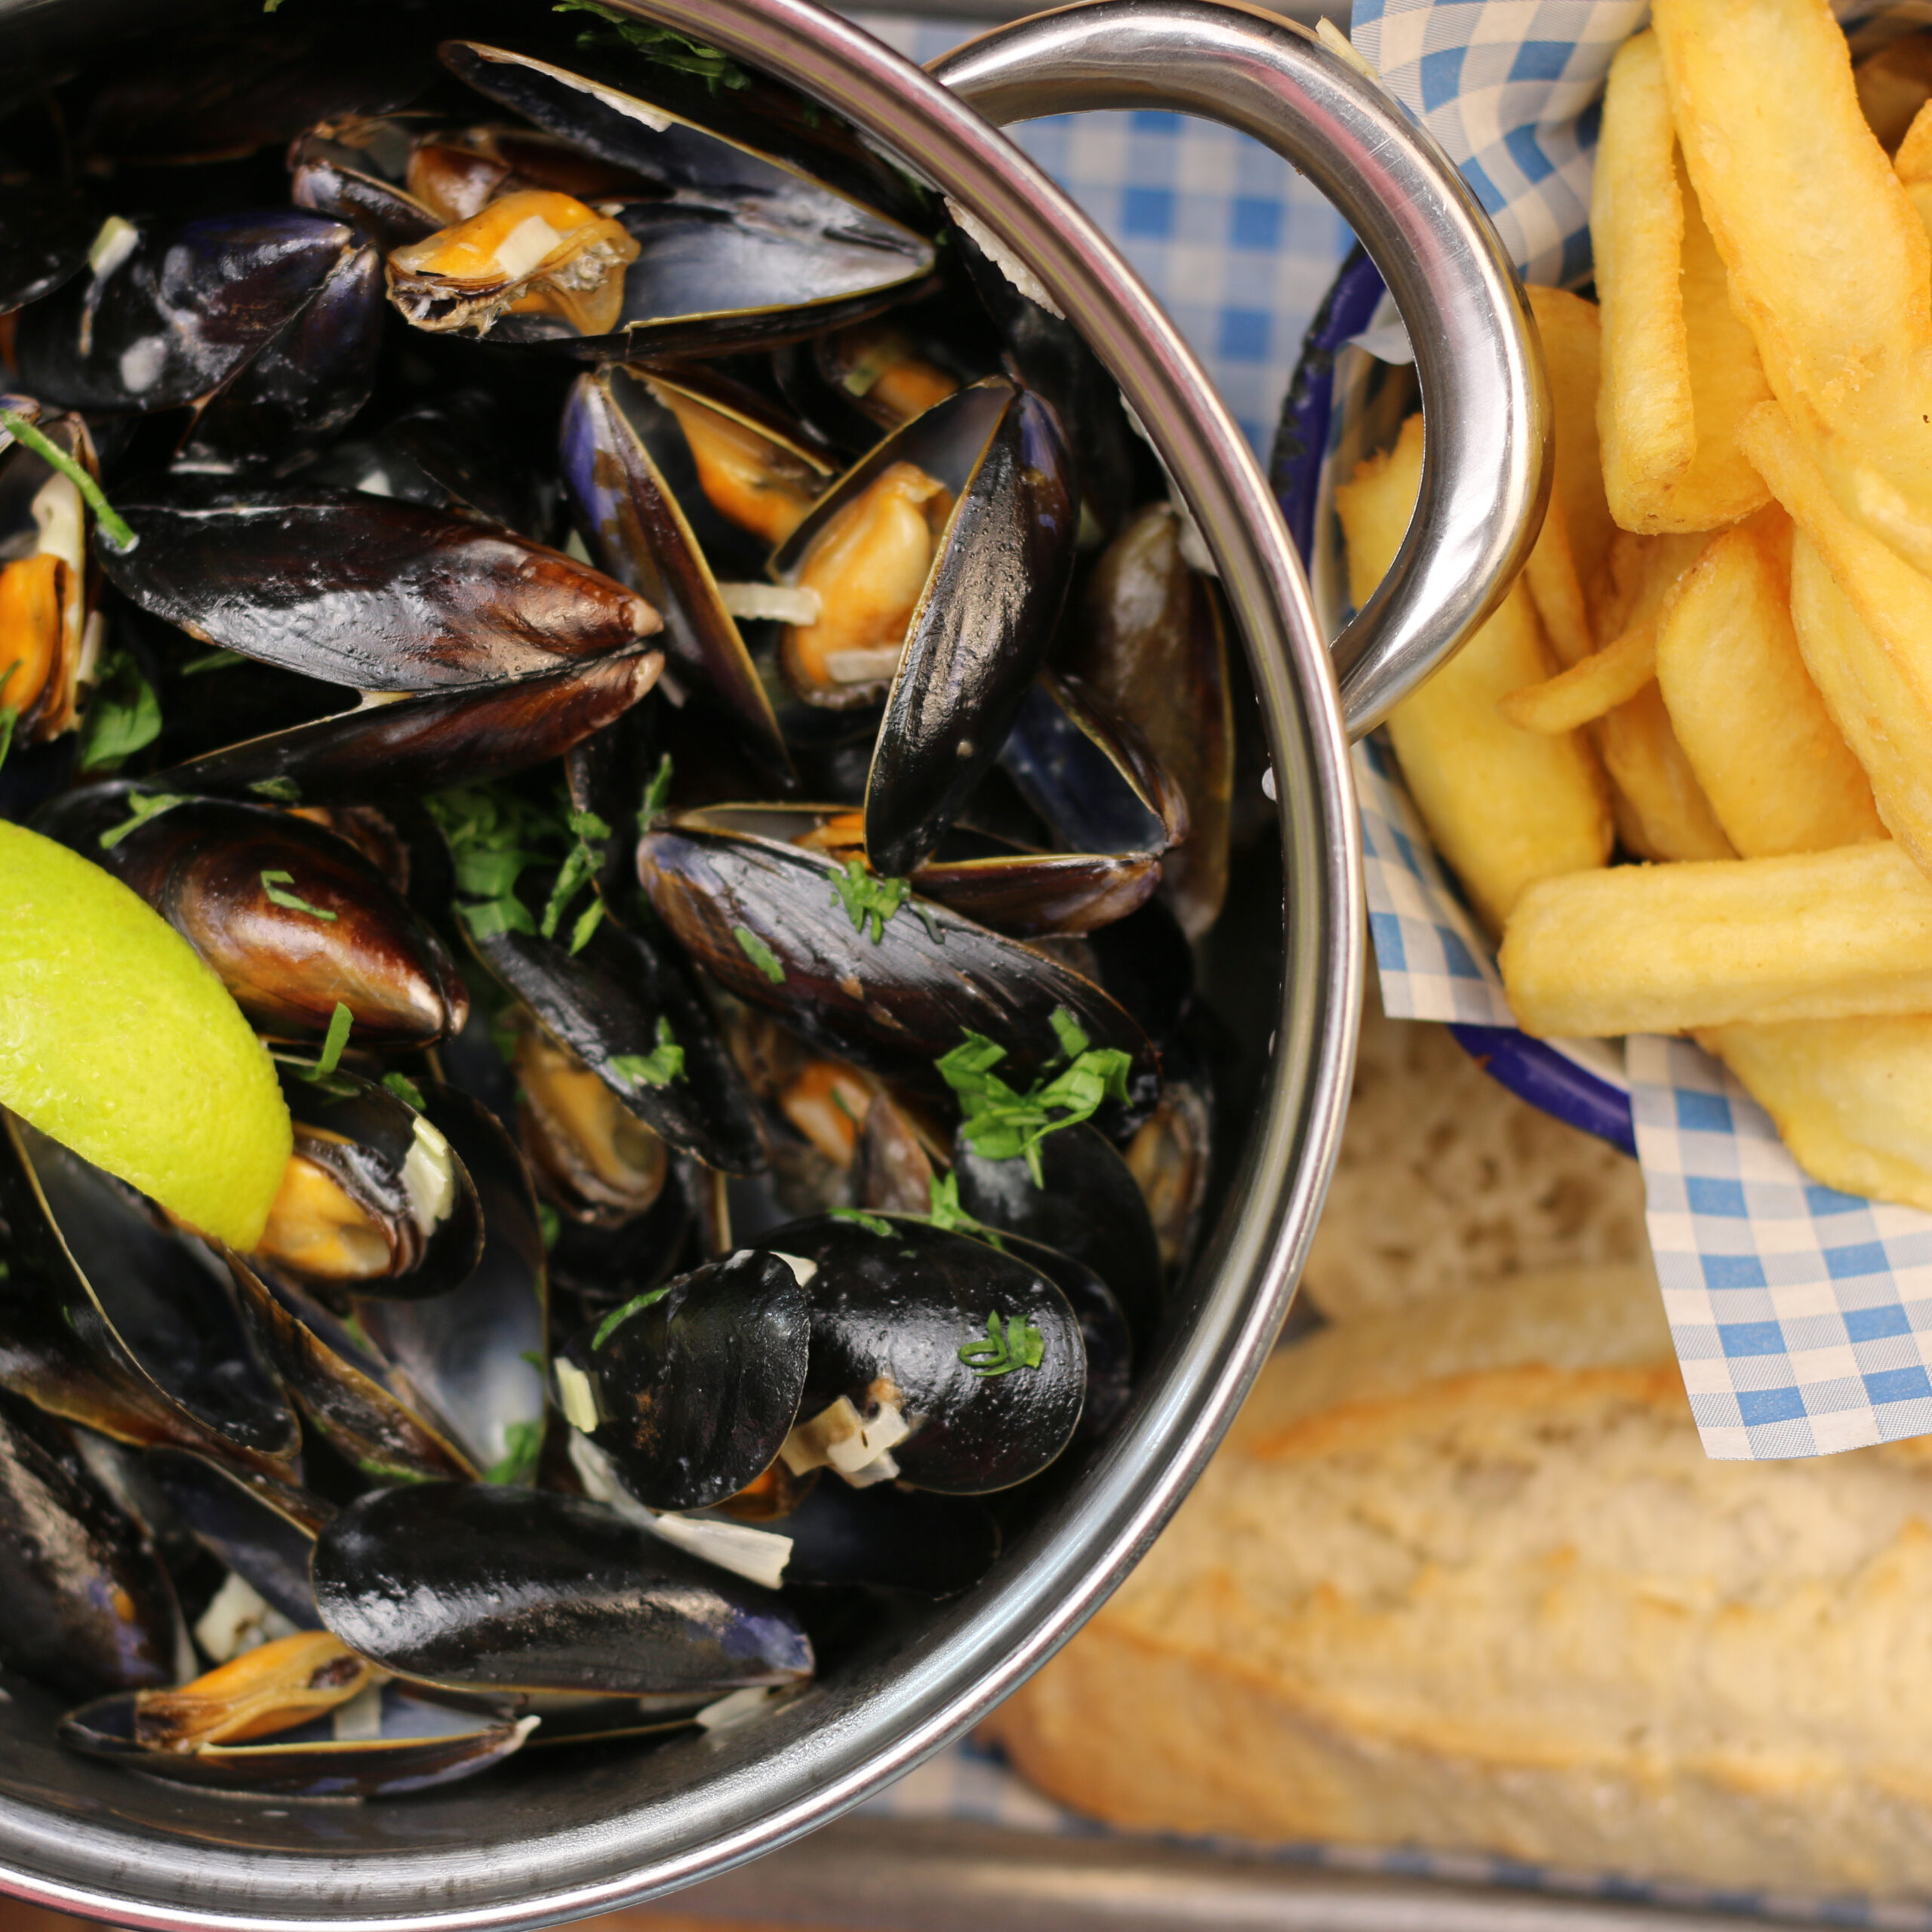 Mussels served in a bowl with a bowl of fries and crusty bread